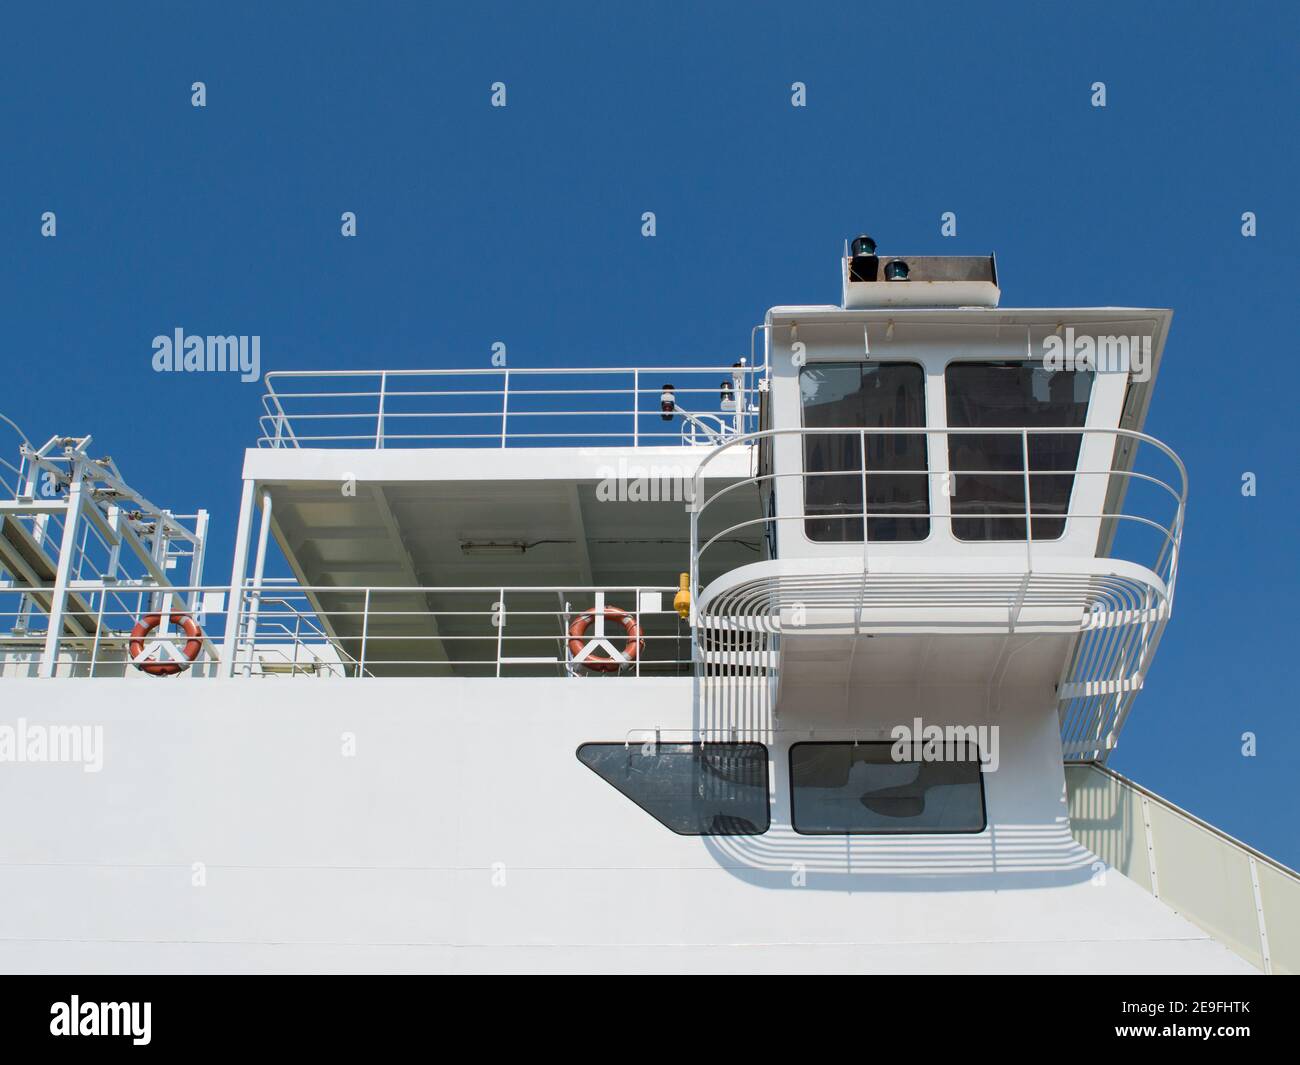 Detail of control bridge on a passenger ferry, navigation and communication tower and equipment, signal lights Stock Photo